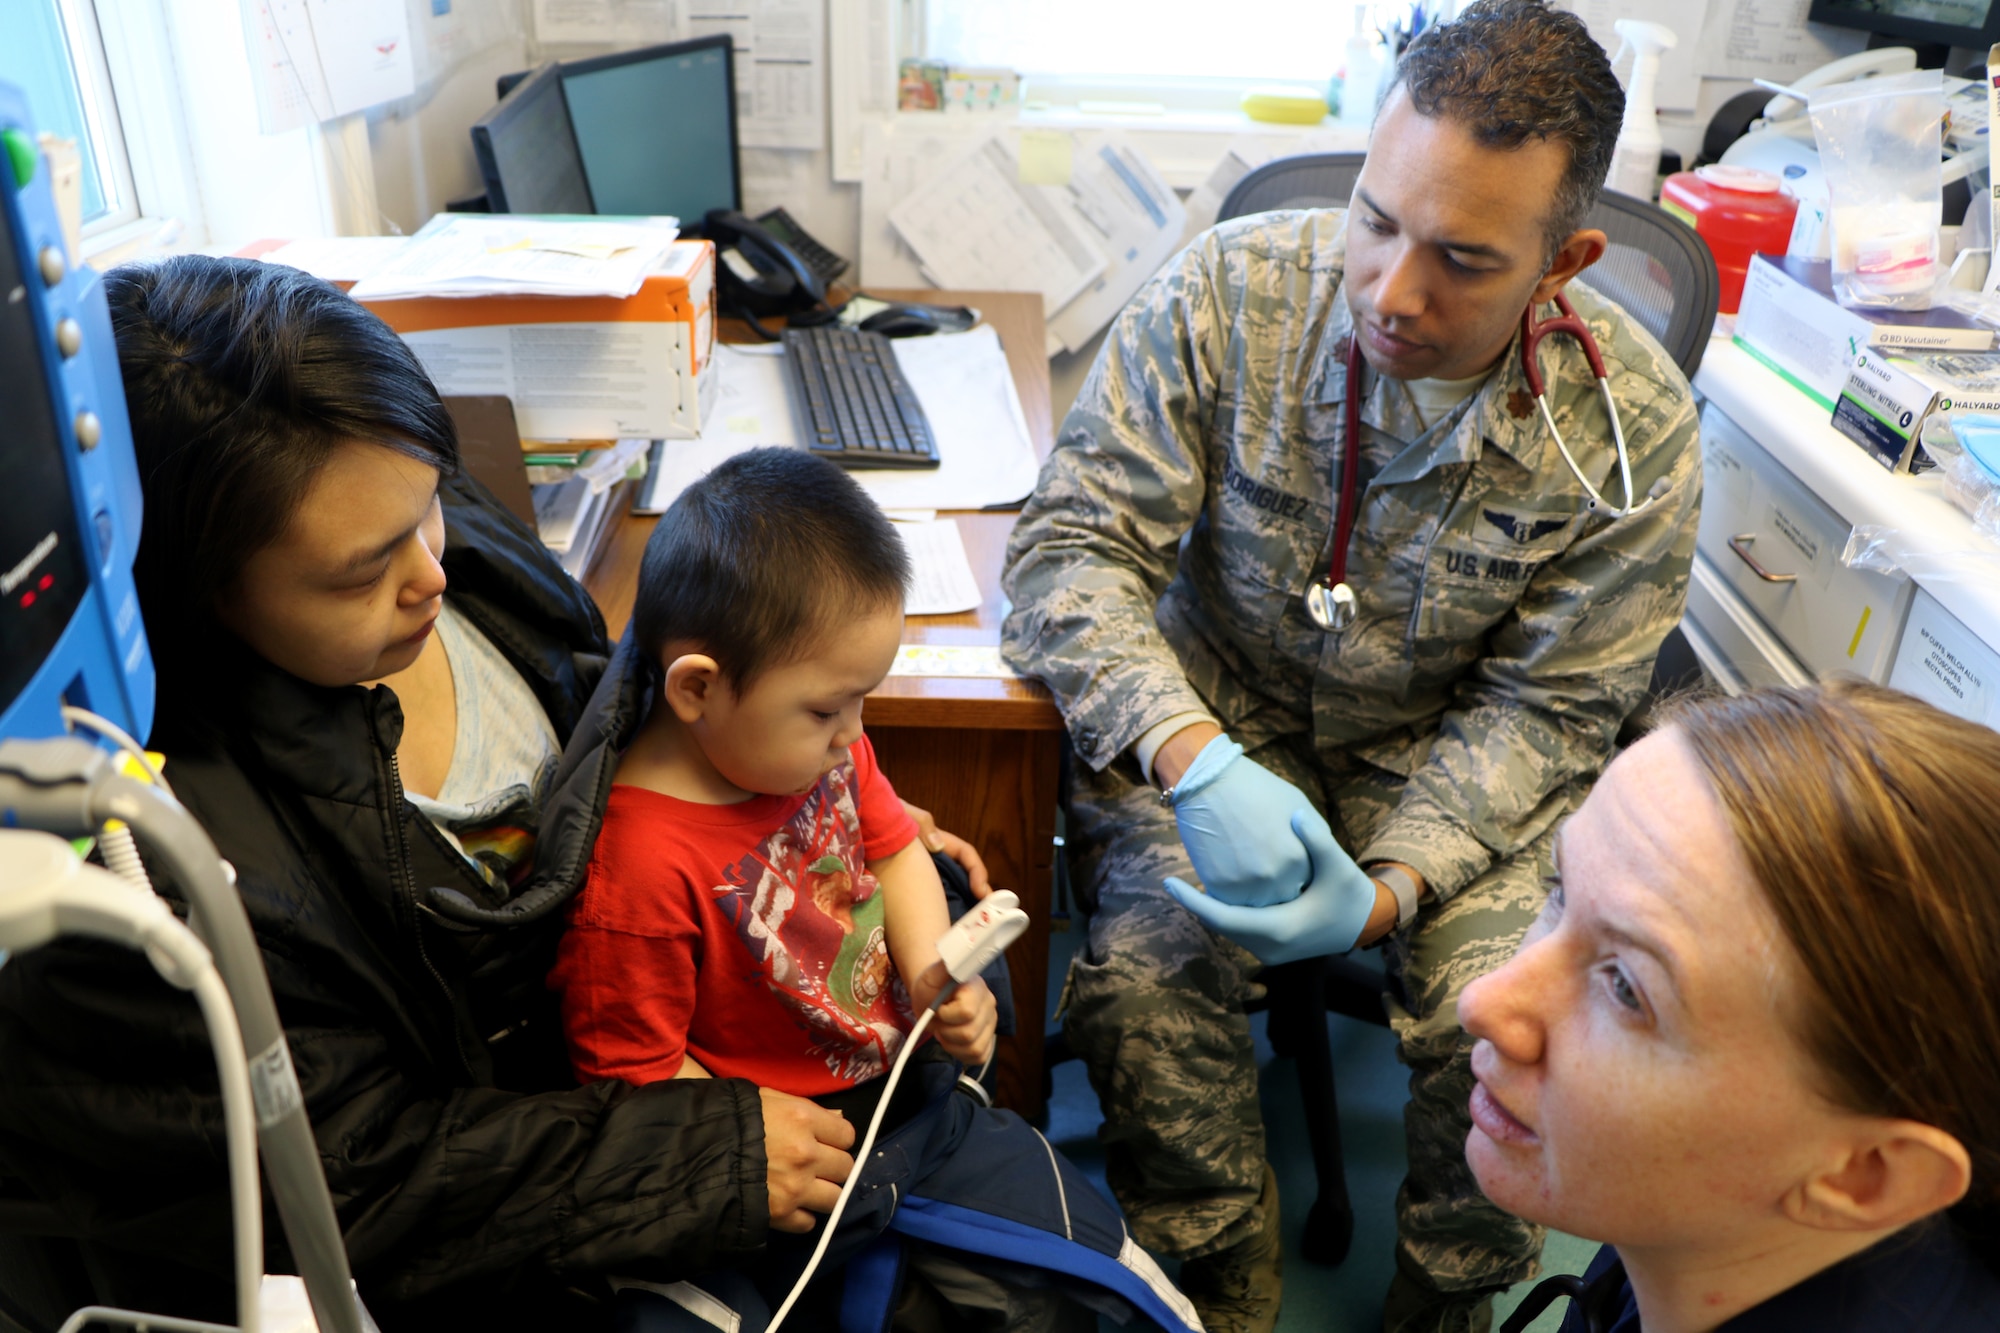 United States Coast Guard Heath Service Technician Third Class Annice Hand (front), checks the amount of oxygen in the blood of a young patient alongside Major Vashun Rodriguez a flight surgeon assigned to the 927th Aeromedical Staging Squadron, MacDill Air Force Base FL, at the Kivalina Clinic, Kivalina, Alaska, April 17, 2018. Military personnel supporting Arctic Care 2018 accomplished critical mission training while providing medical, dental, optometry and veterinary care for underserved villages in the Maniillaq Service Area April 16-24. (U.S. Air Force photo by Maj. Joe Simms)